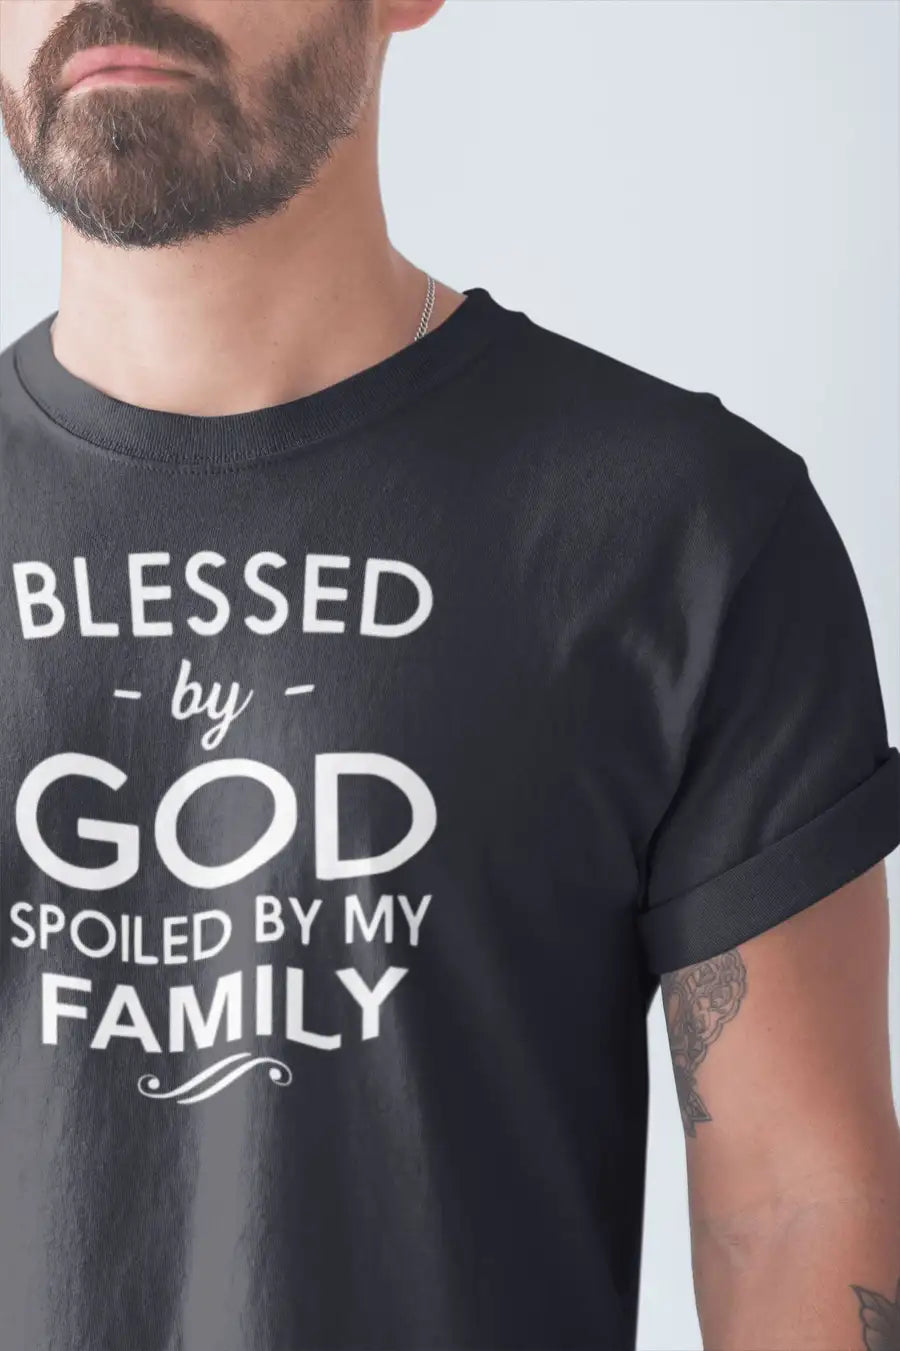 Spoiled By My Family Exclusive T Shirt for Married Men and Women | Premium Design | Catch My Drift India - Catch My Drift India  black, clothing, couples, family, female, general, god, husban